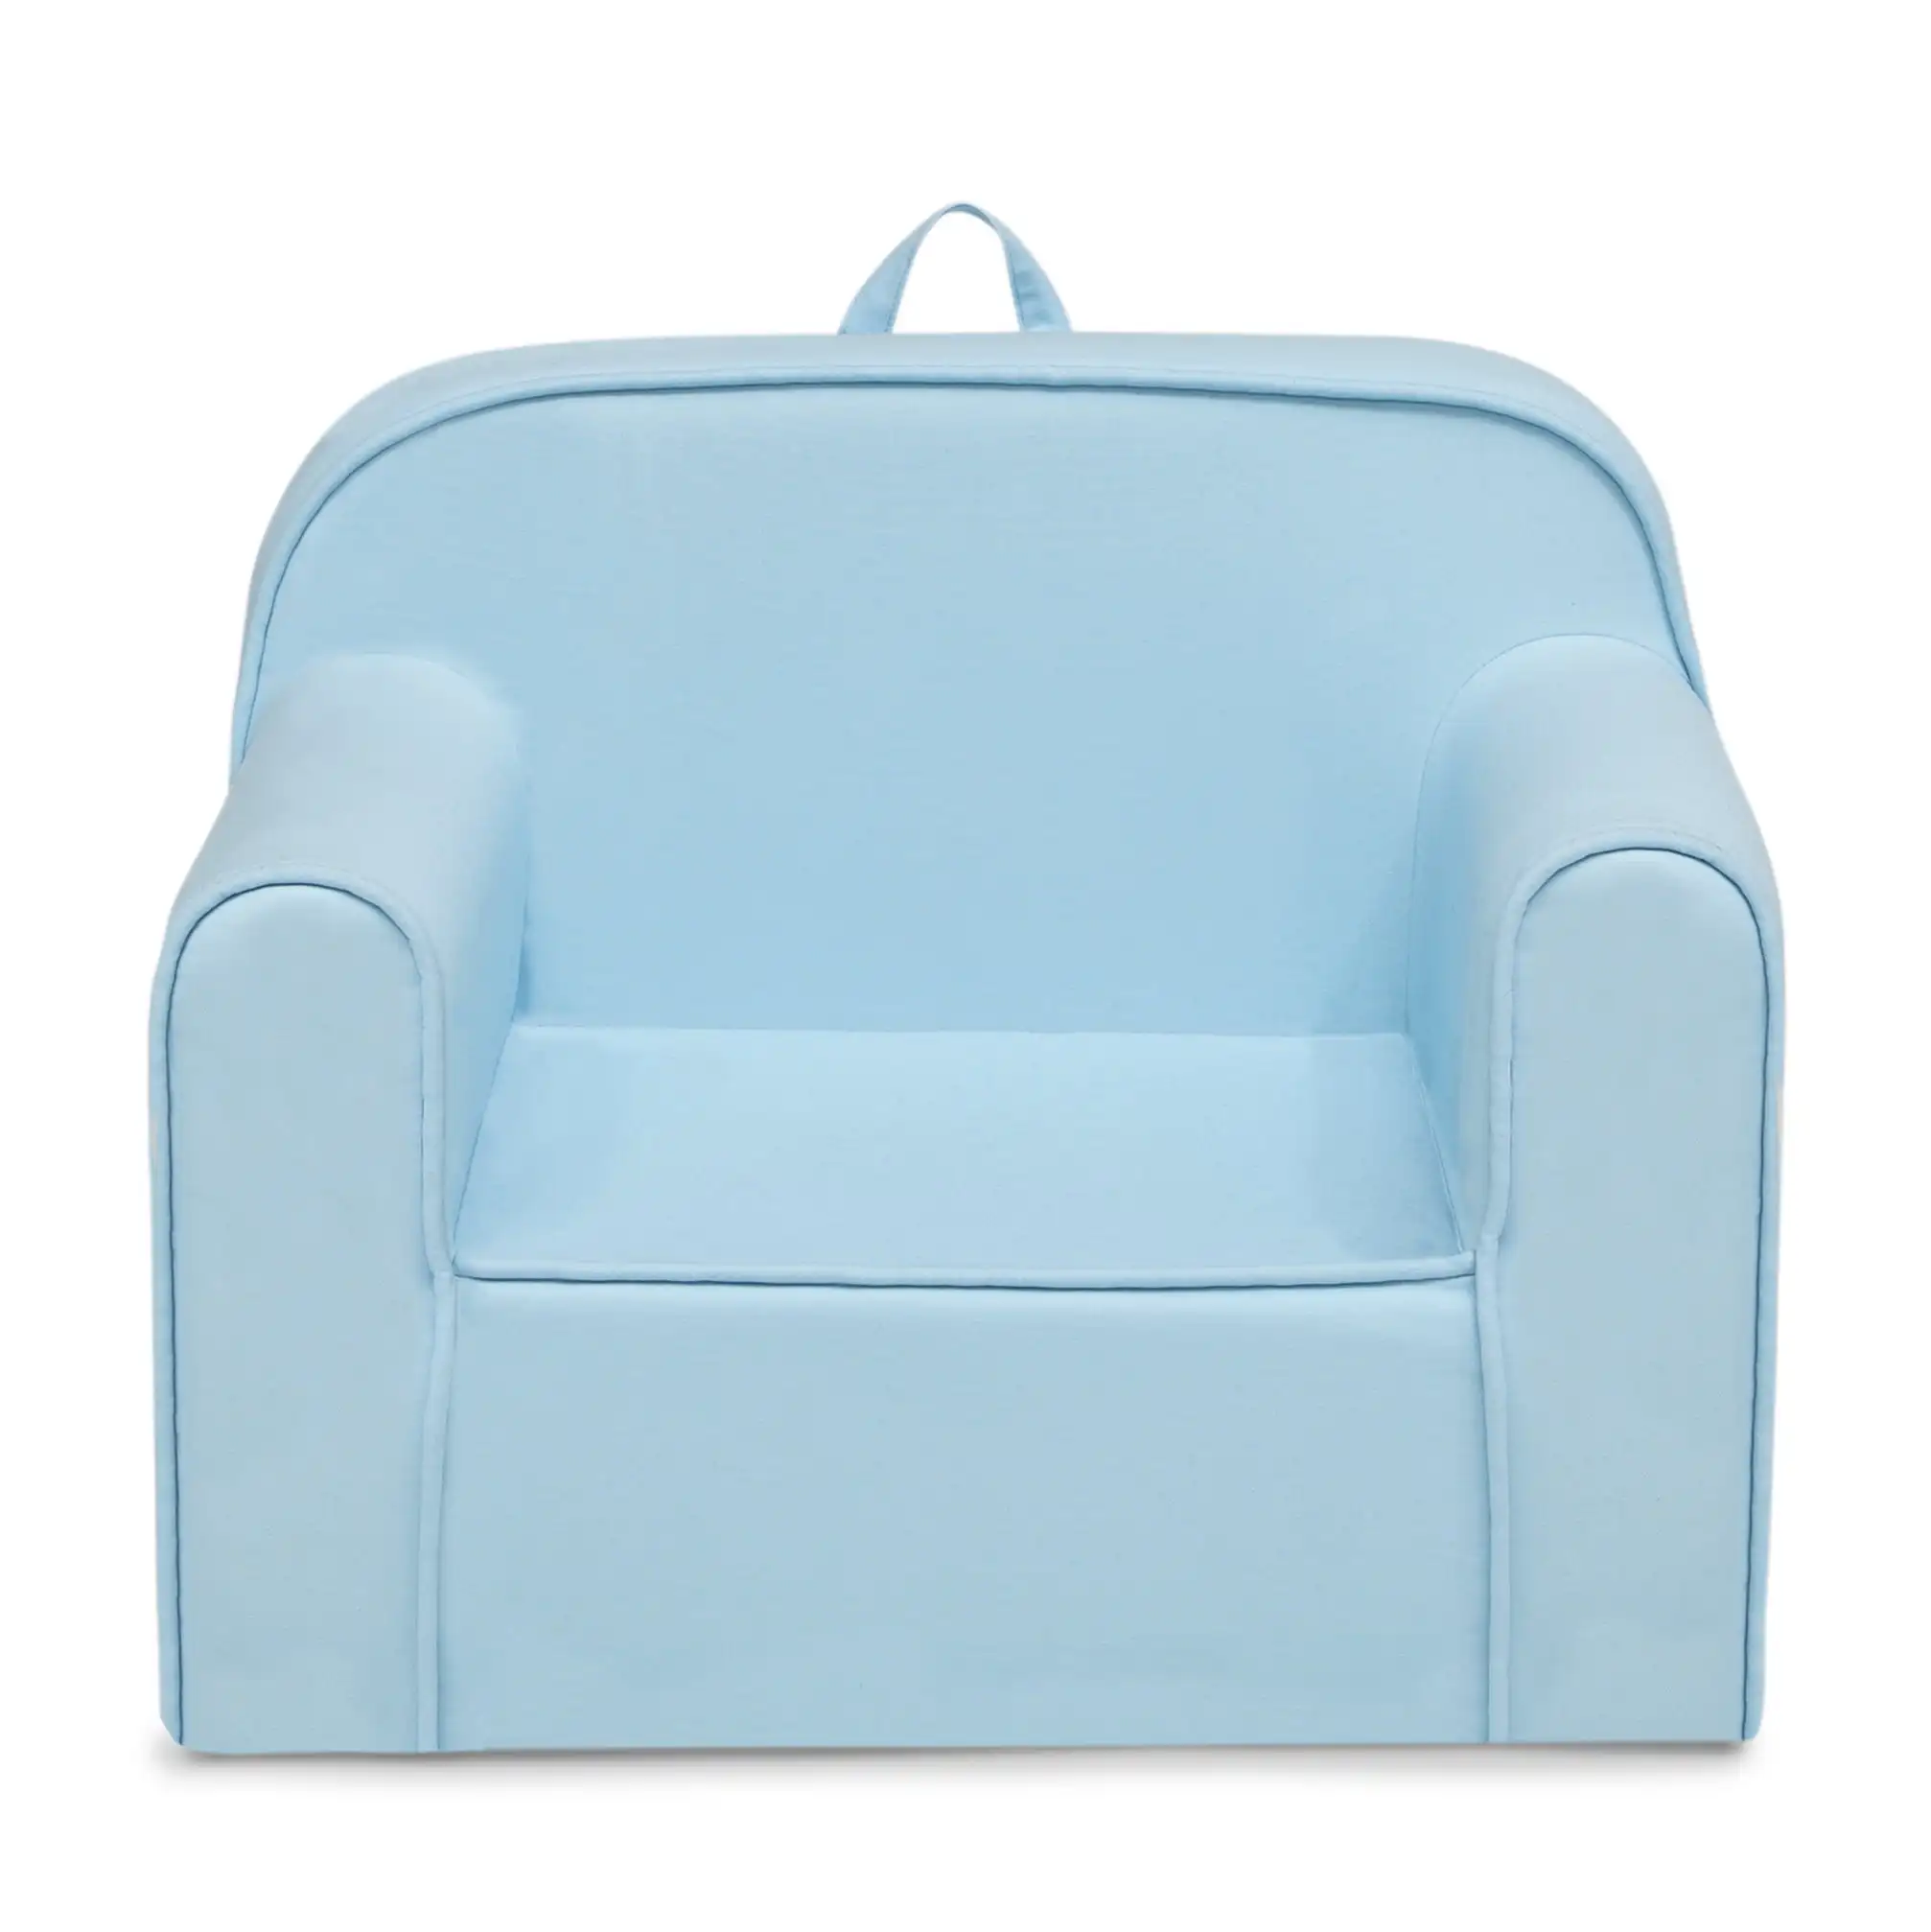 

Delta Children Cozee Chair for Kids for Ages 18 Months and Up, Light Blue